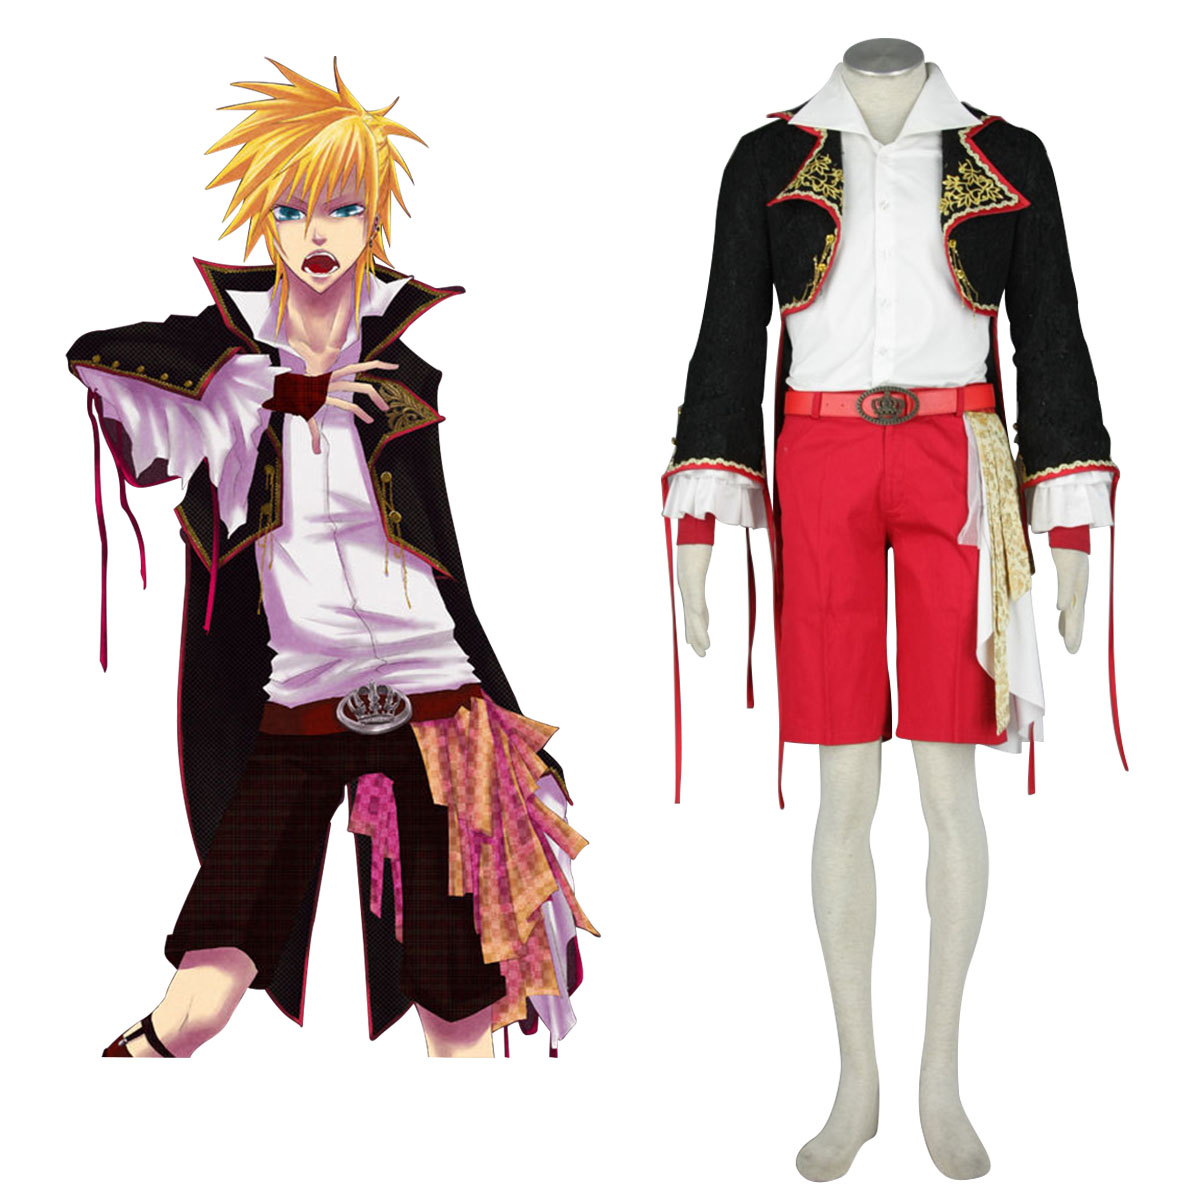 Lusso Vocaloid Kagamine Len 2 Costumi Carnevale Cosplay